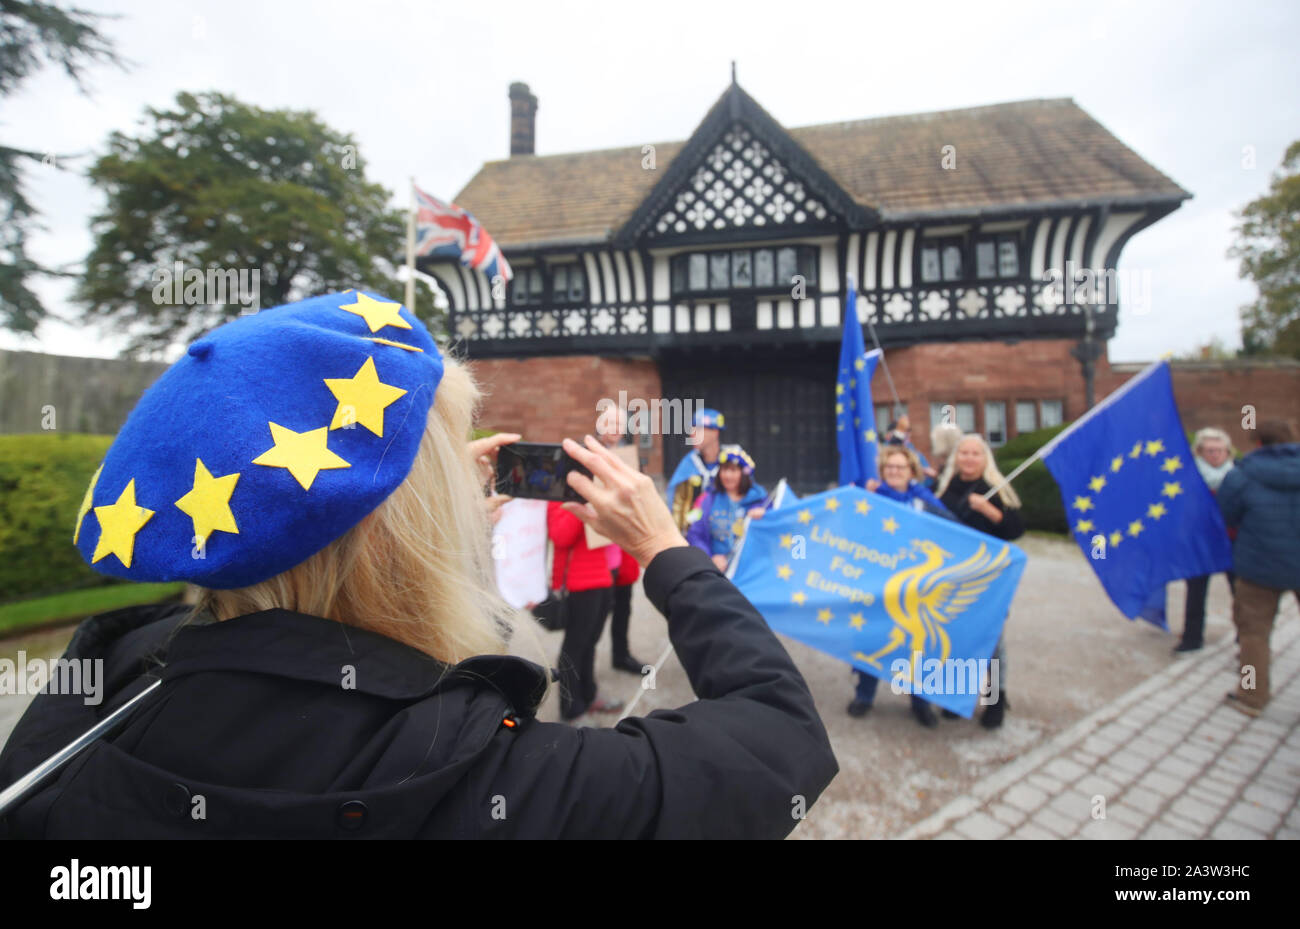 Anti-Brexit protesters outside the entrance to Thornton Manor, a luxury wedding venue on The Wirral, in Cheshire, where Prime Minister Boris Johnson and Taoiseach Leo Varadkar are meeting in a bid to break the Brexit deadlock as the departure deadline looms. Stock Photo